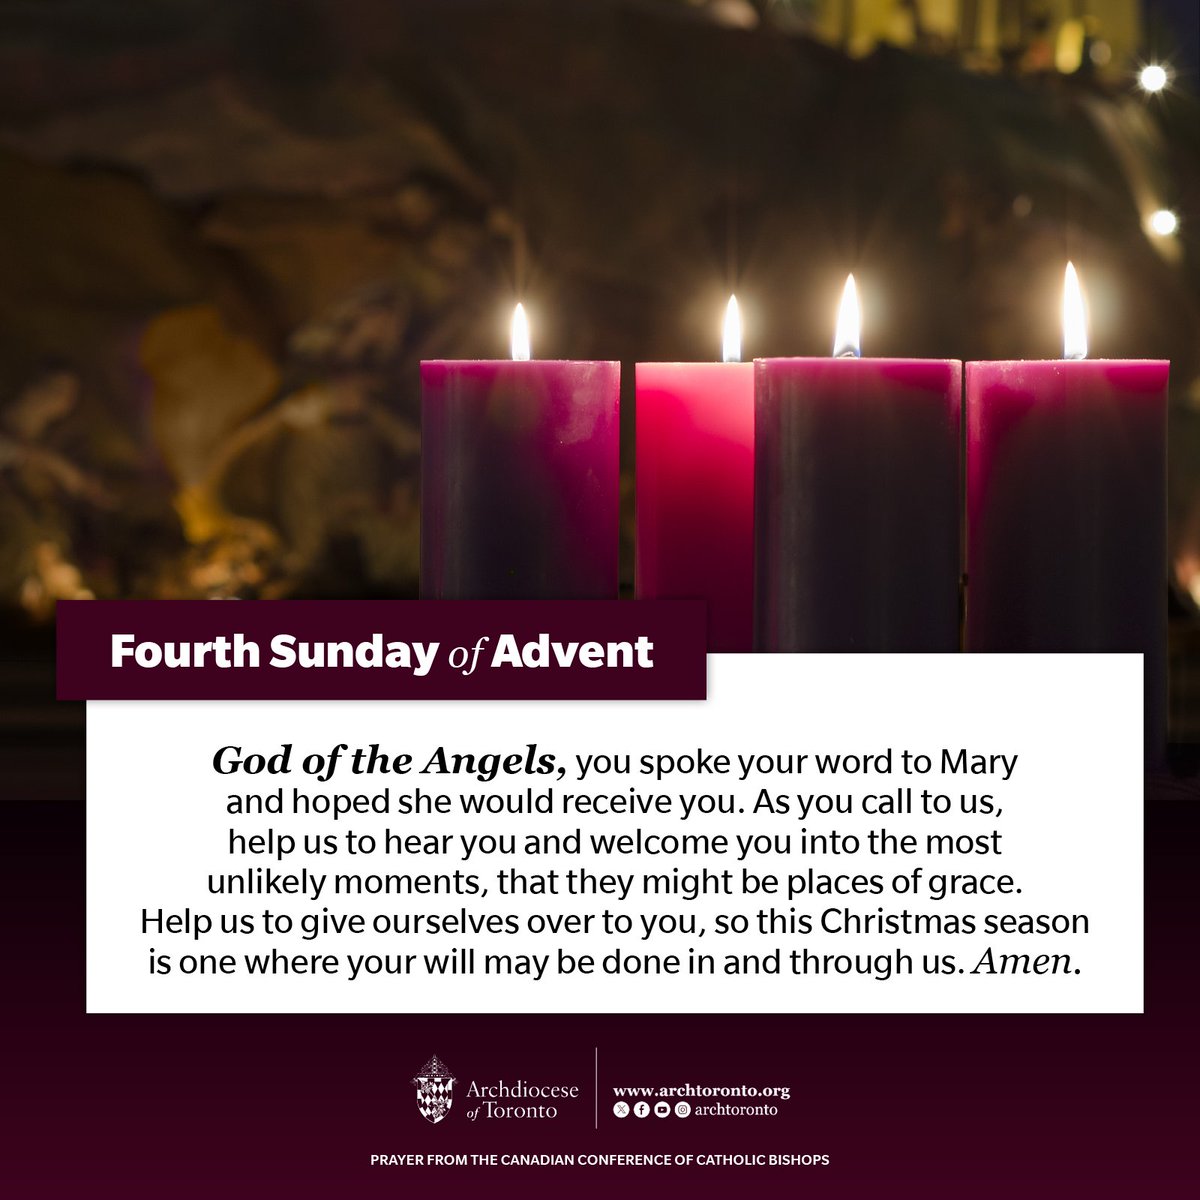 God of the Angels, you spoke your word to Mary and hoped she would receive you. As you call to us, help us to hear you and welcome you into the most unlikely moments, that they might be places of grace... Amen. @CCCB_CECC #Advent2023